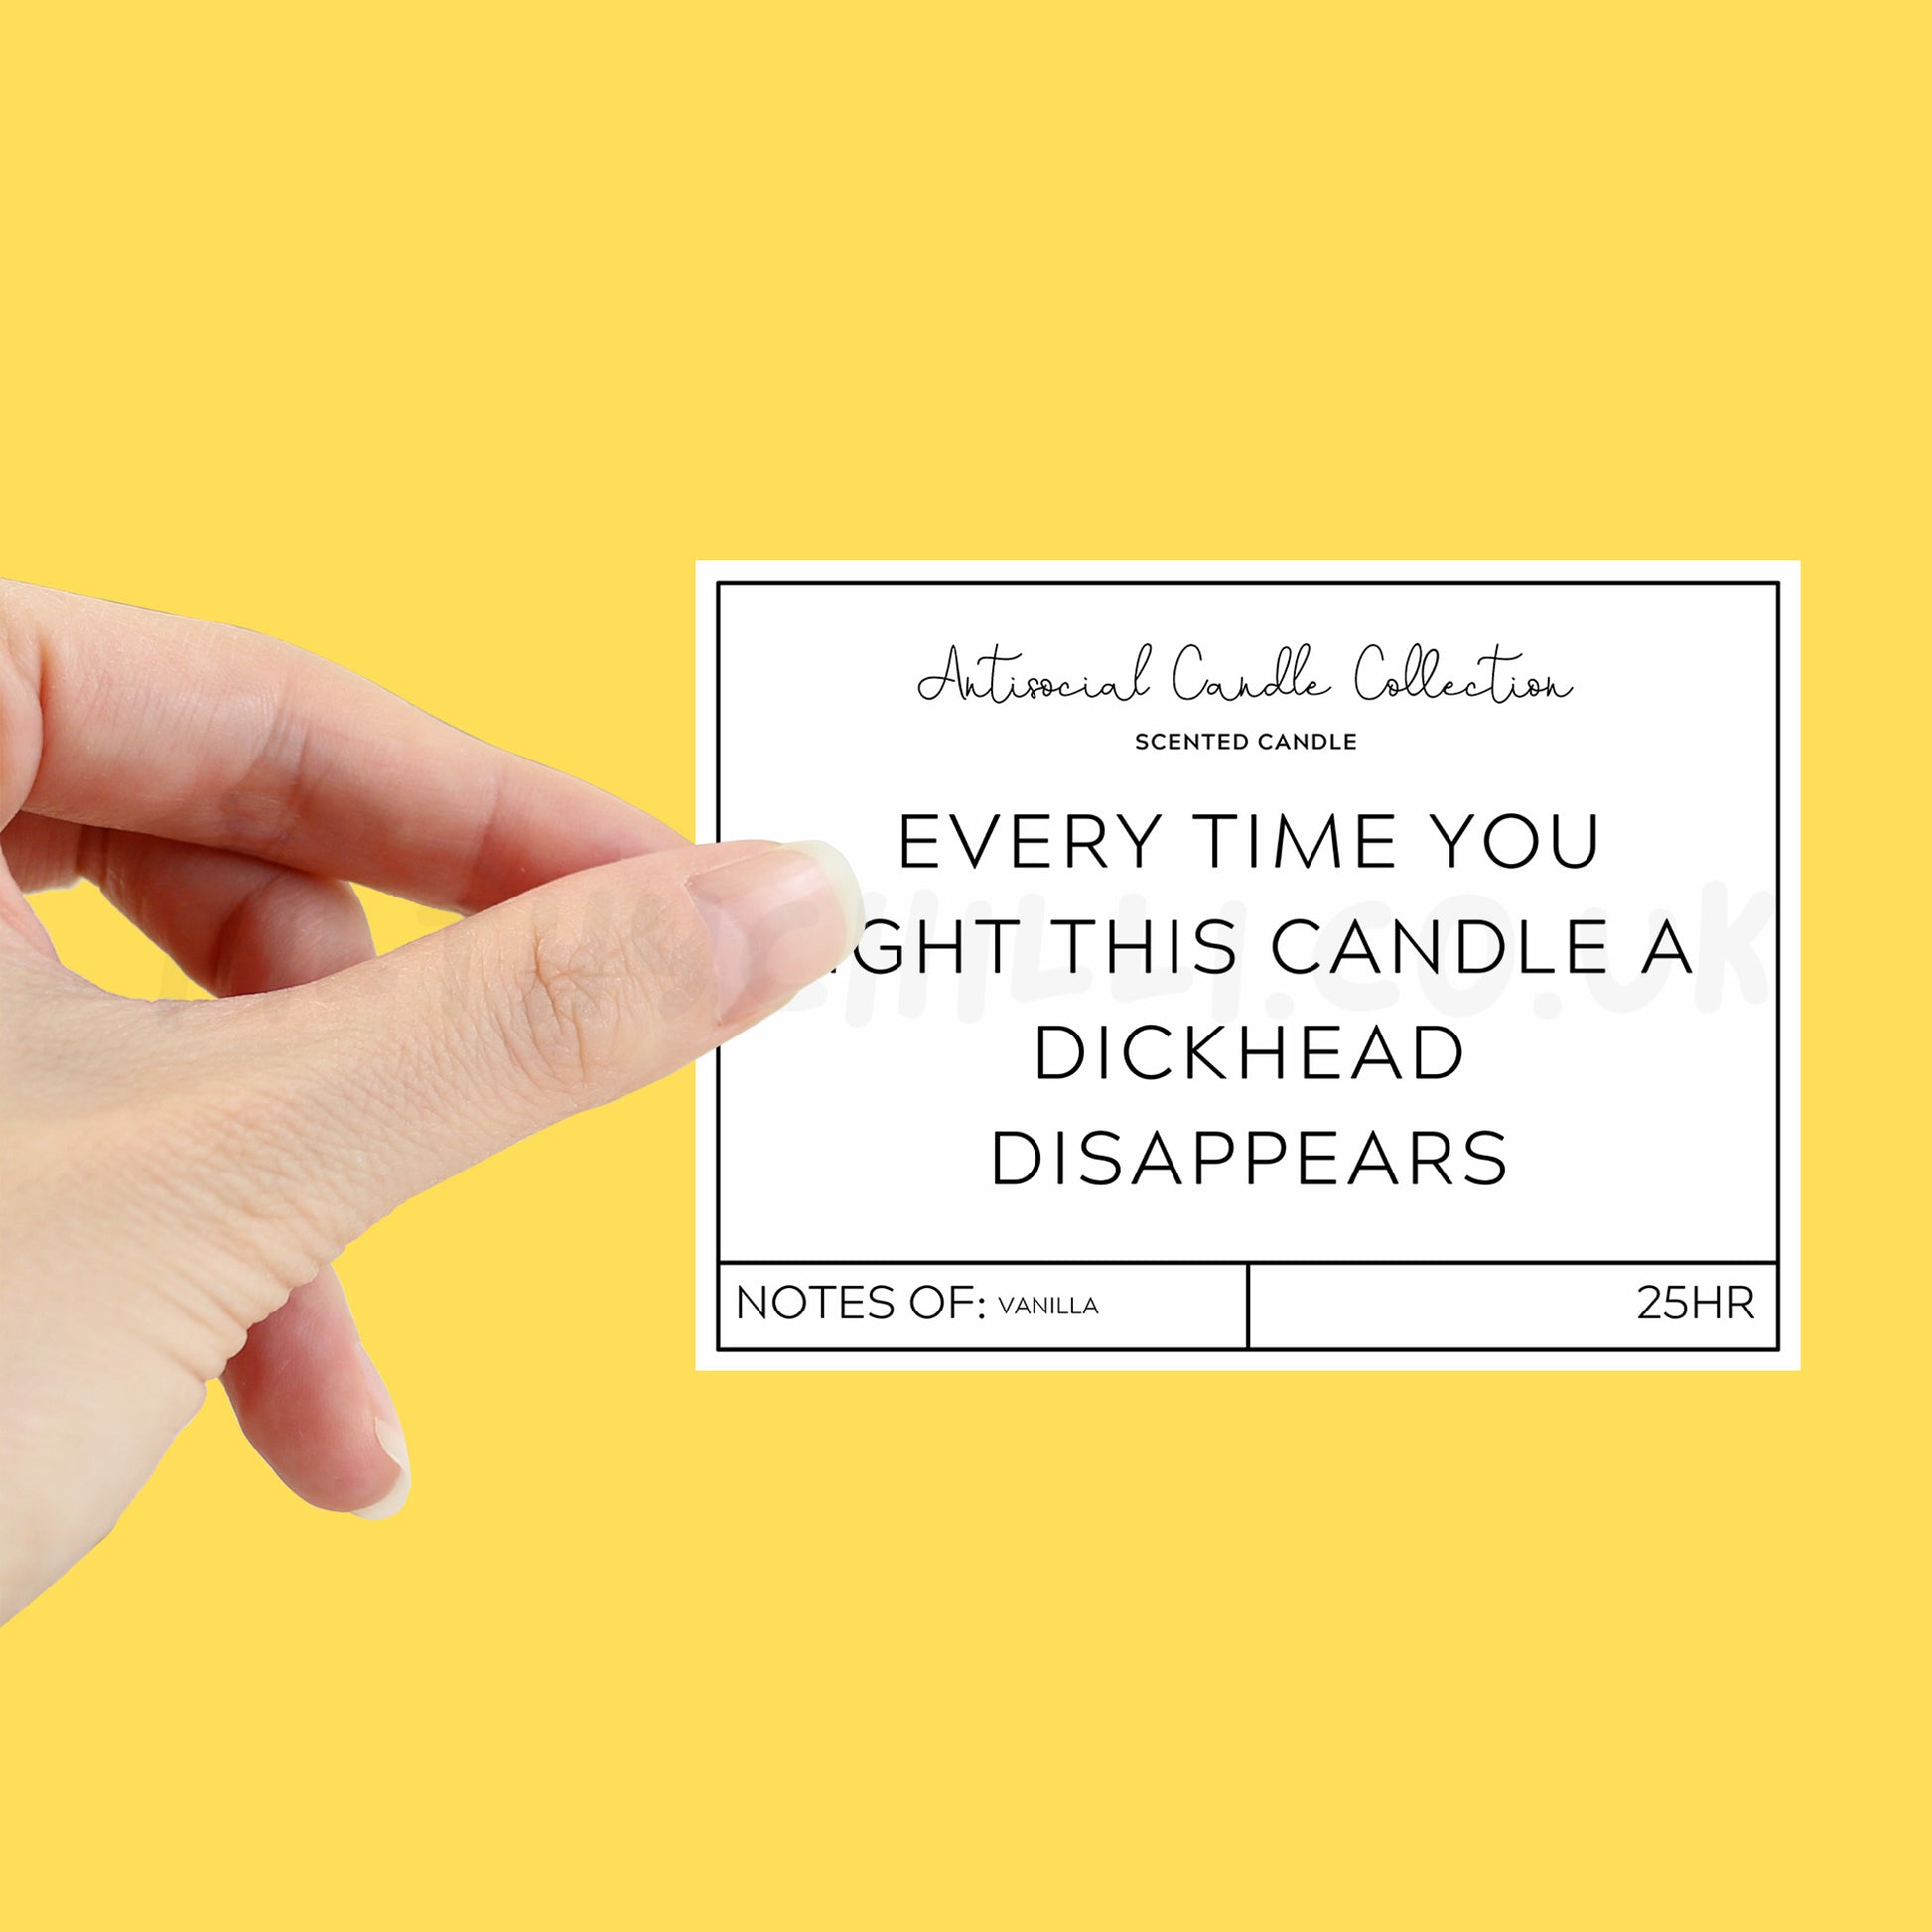 Every time you light this candle a dickhead disappears candle label